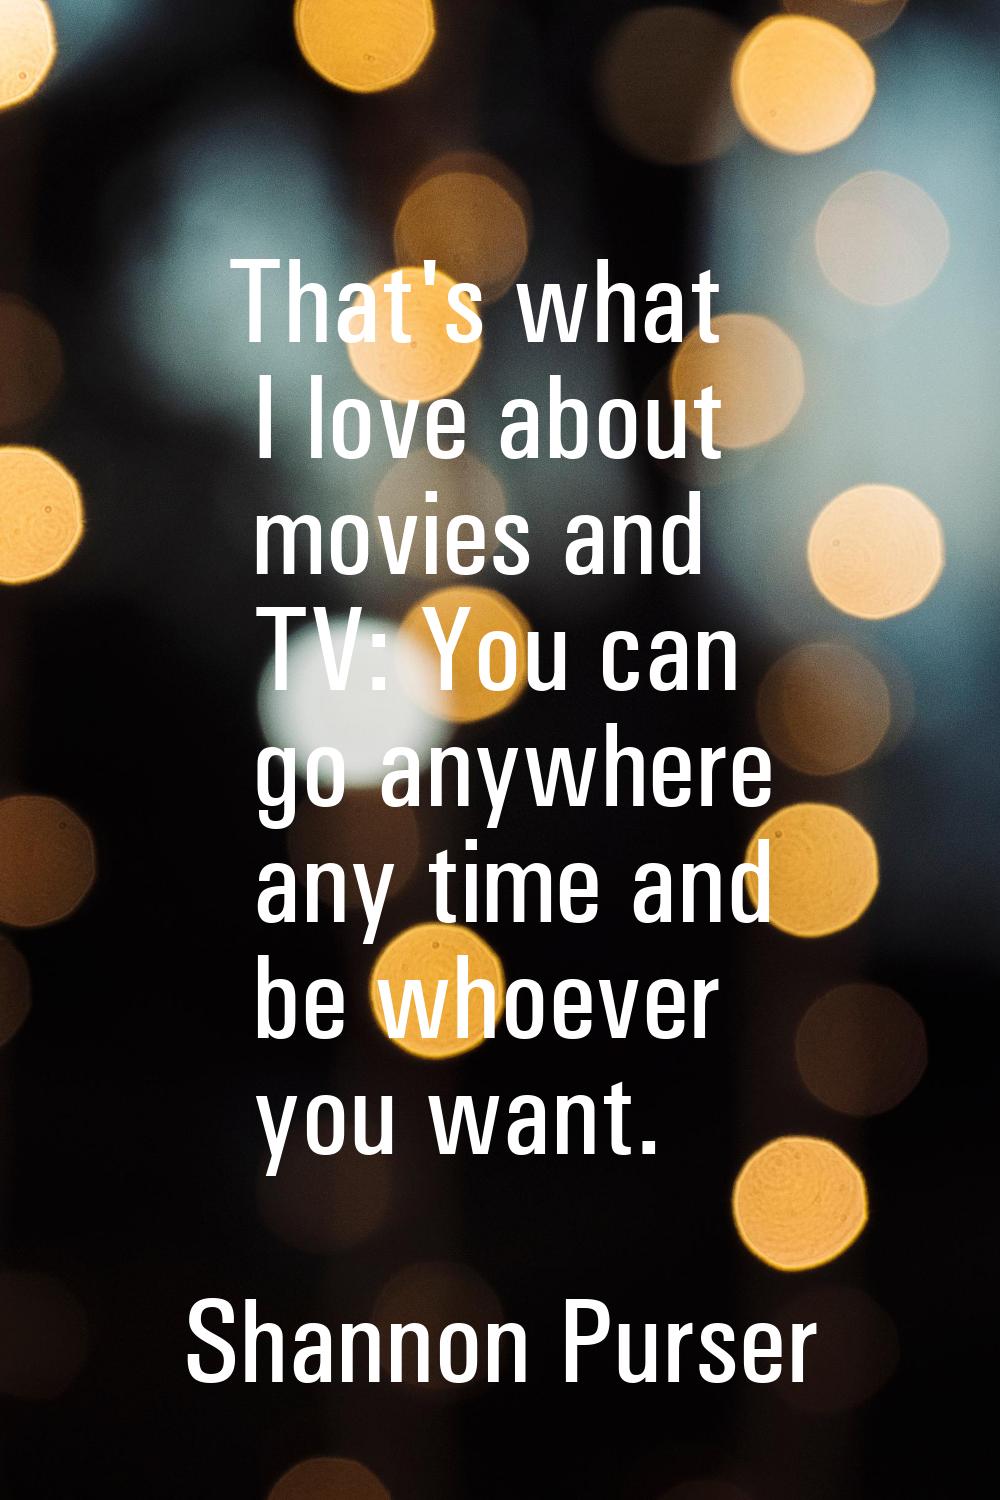 That's what I love about movies and TV: You can go anywhere any time and be whoever you want.